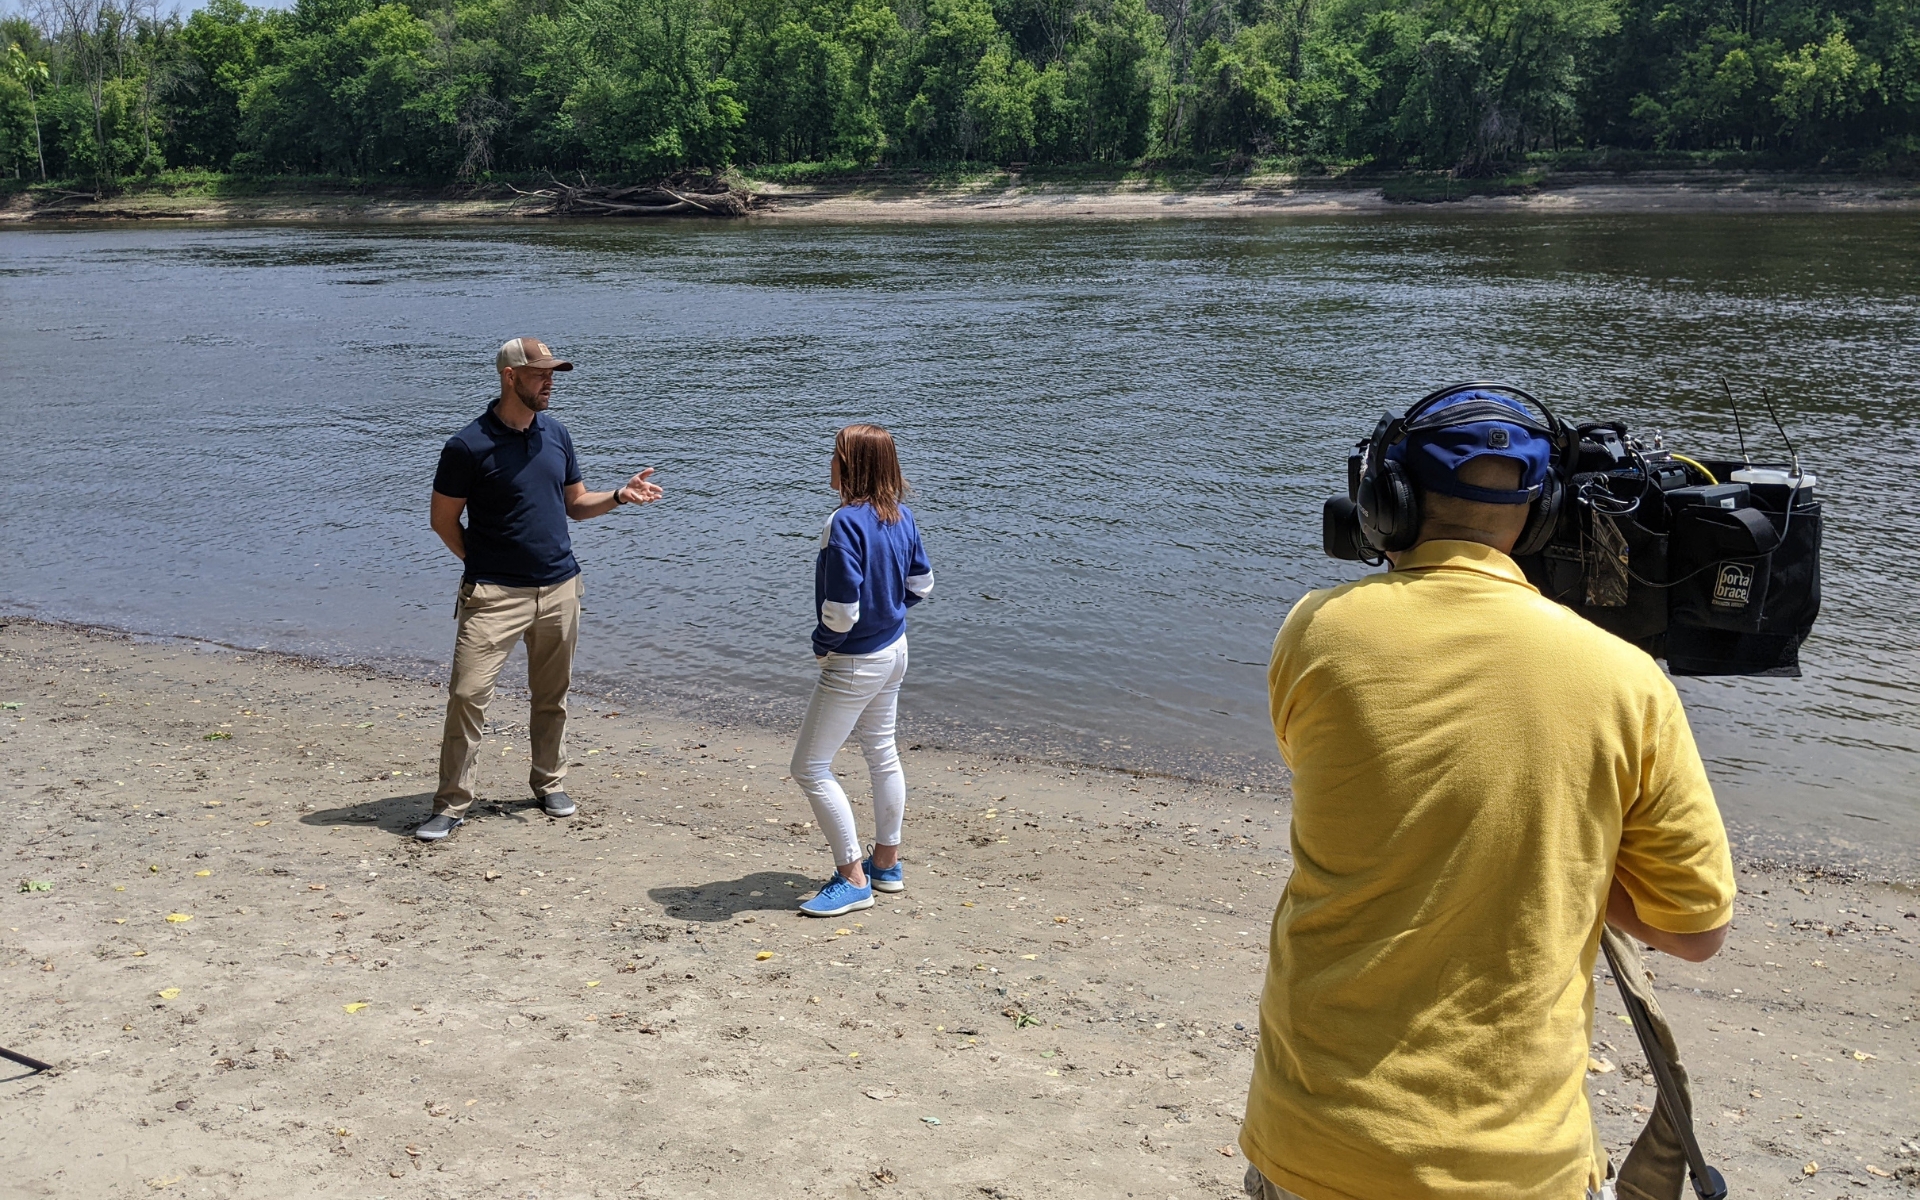 FMR Water Program Director Trevor Russell stands along the riverbanks, speaking to a journalist who is facing away from the camera. In the foreground, a camera operator in a yellow shirt films the two of them.